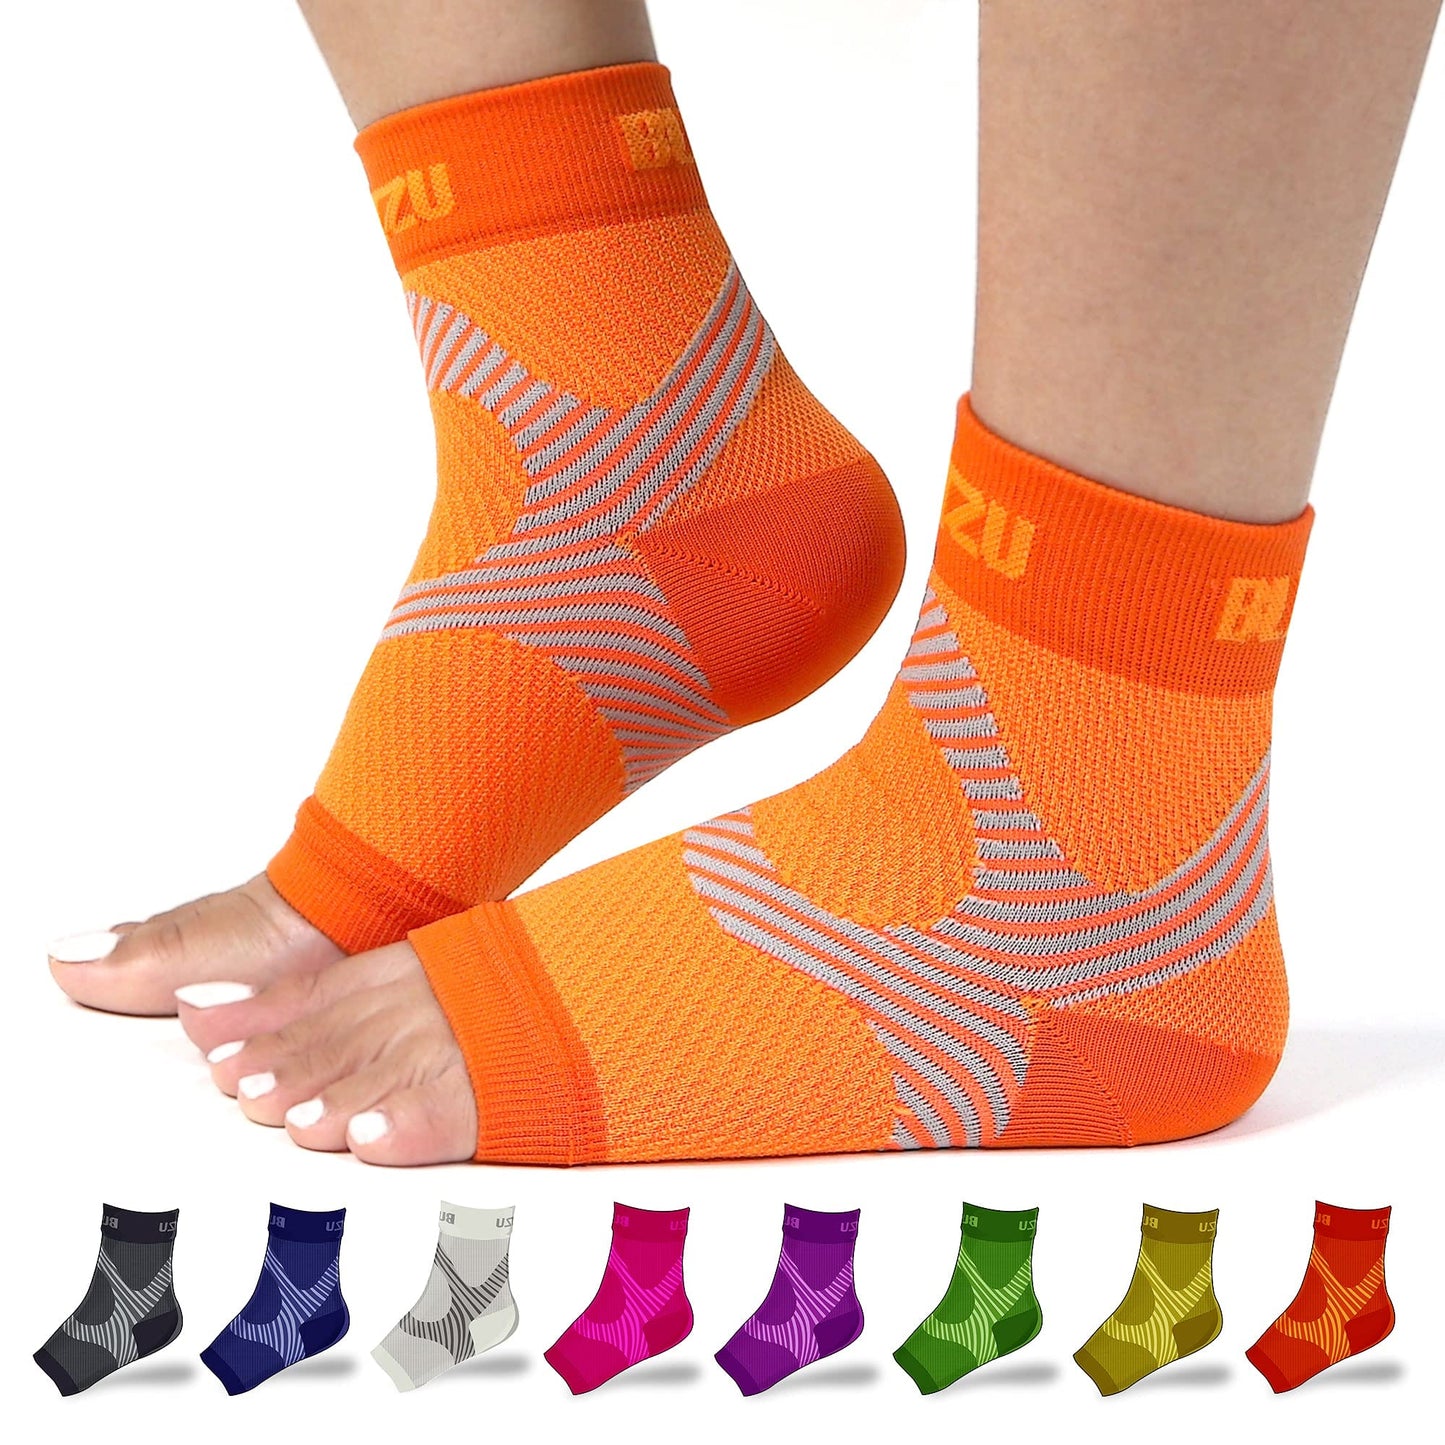 Foot Compression Sleeve, Open Toe For Women